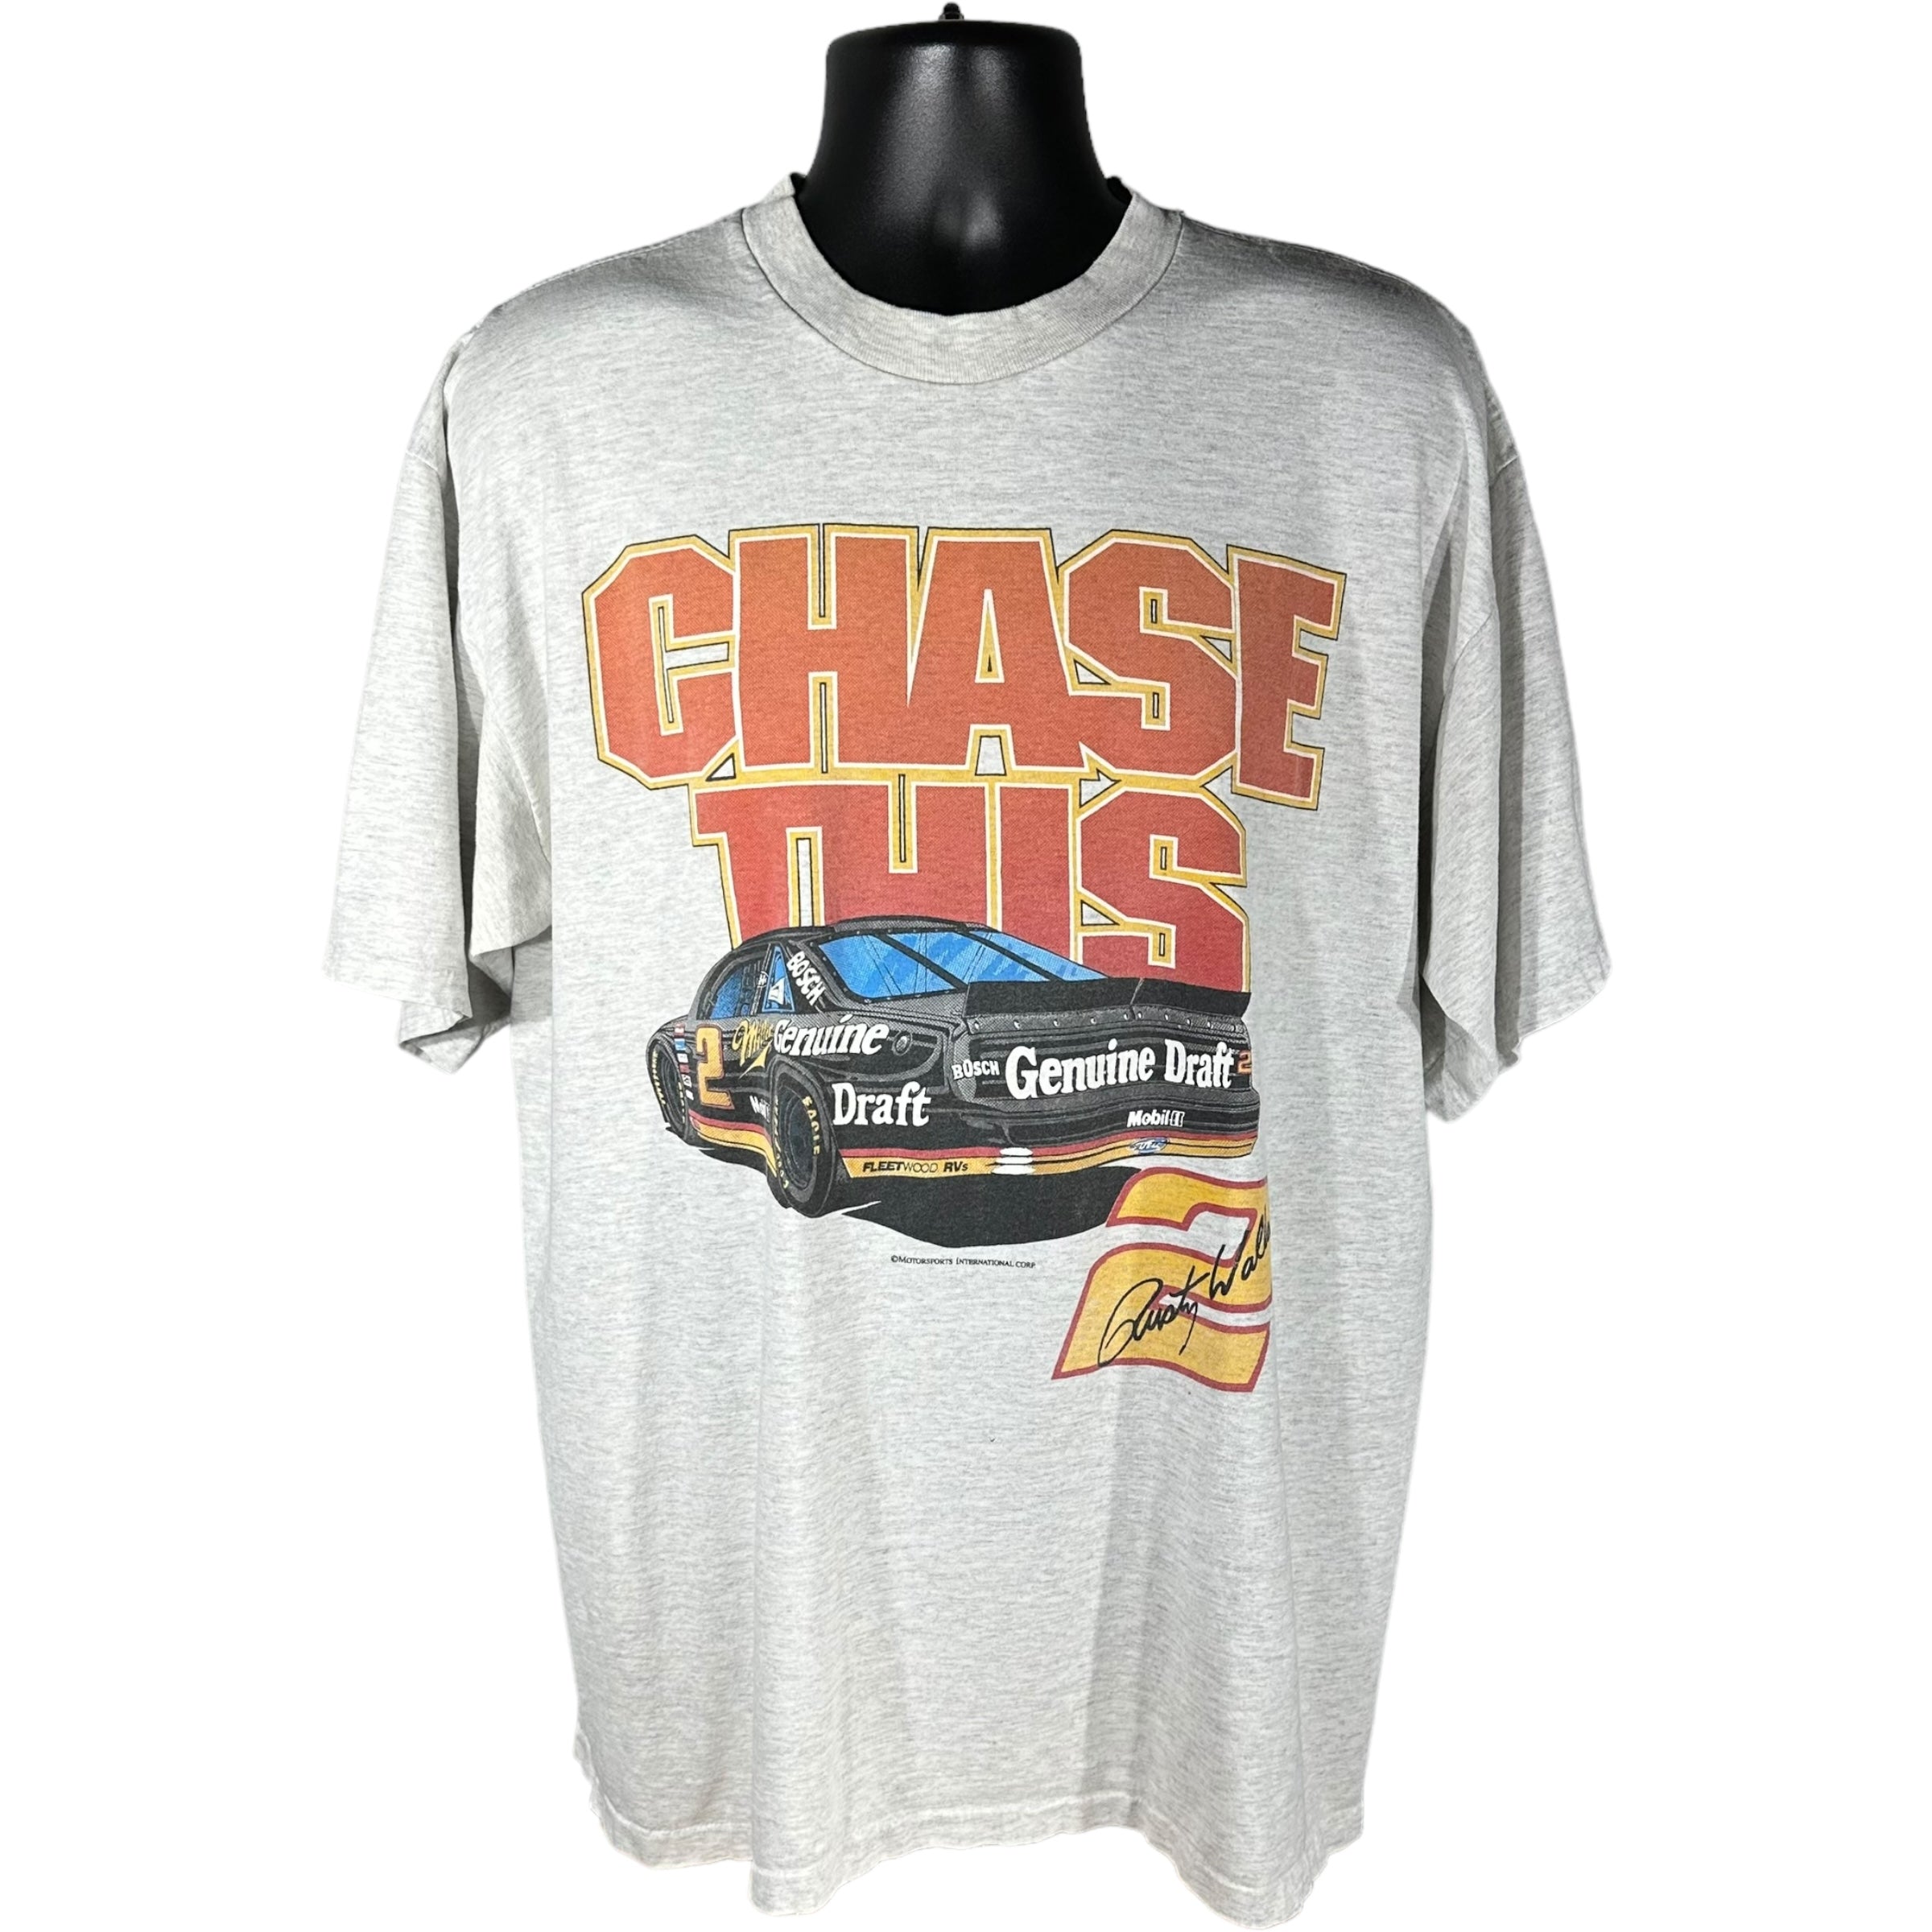 Vintage "Chase This" Eighteen Wins Rusty Wallace 2 Years Tee